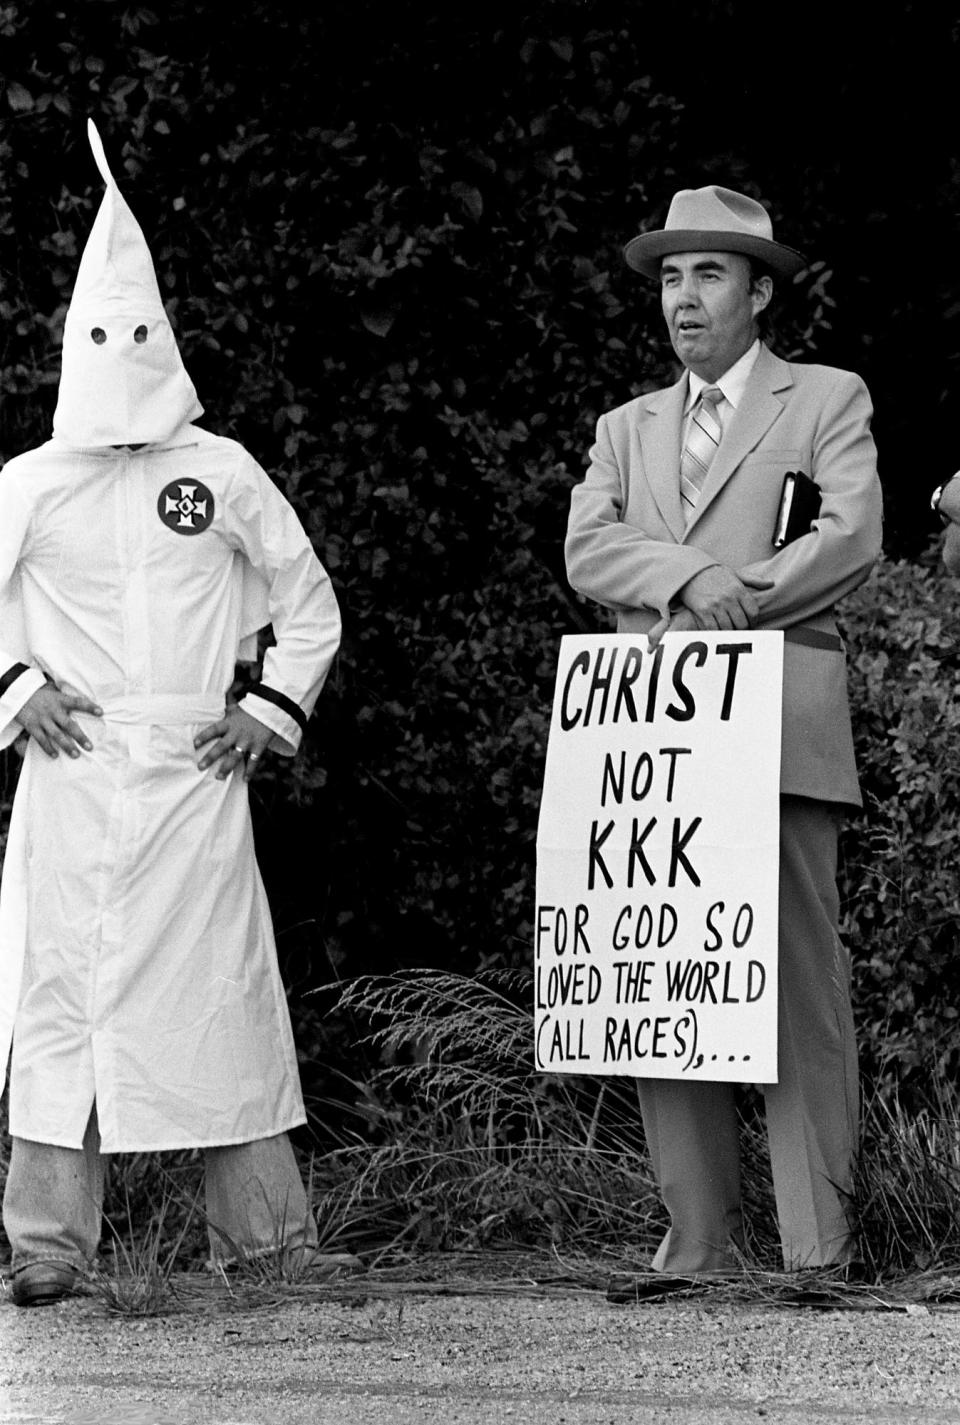 The Rev. Mel Perry, right, of Nashville is being confronted by a hooded Ku Klux Klan member as he protests alone at their wedding and rally off of Route 64 near Pulaski, Tenn. July 12, 1980.